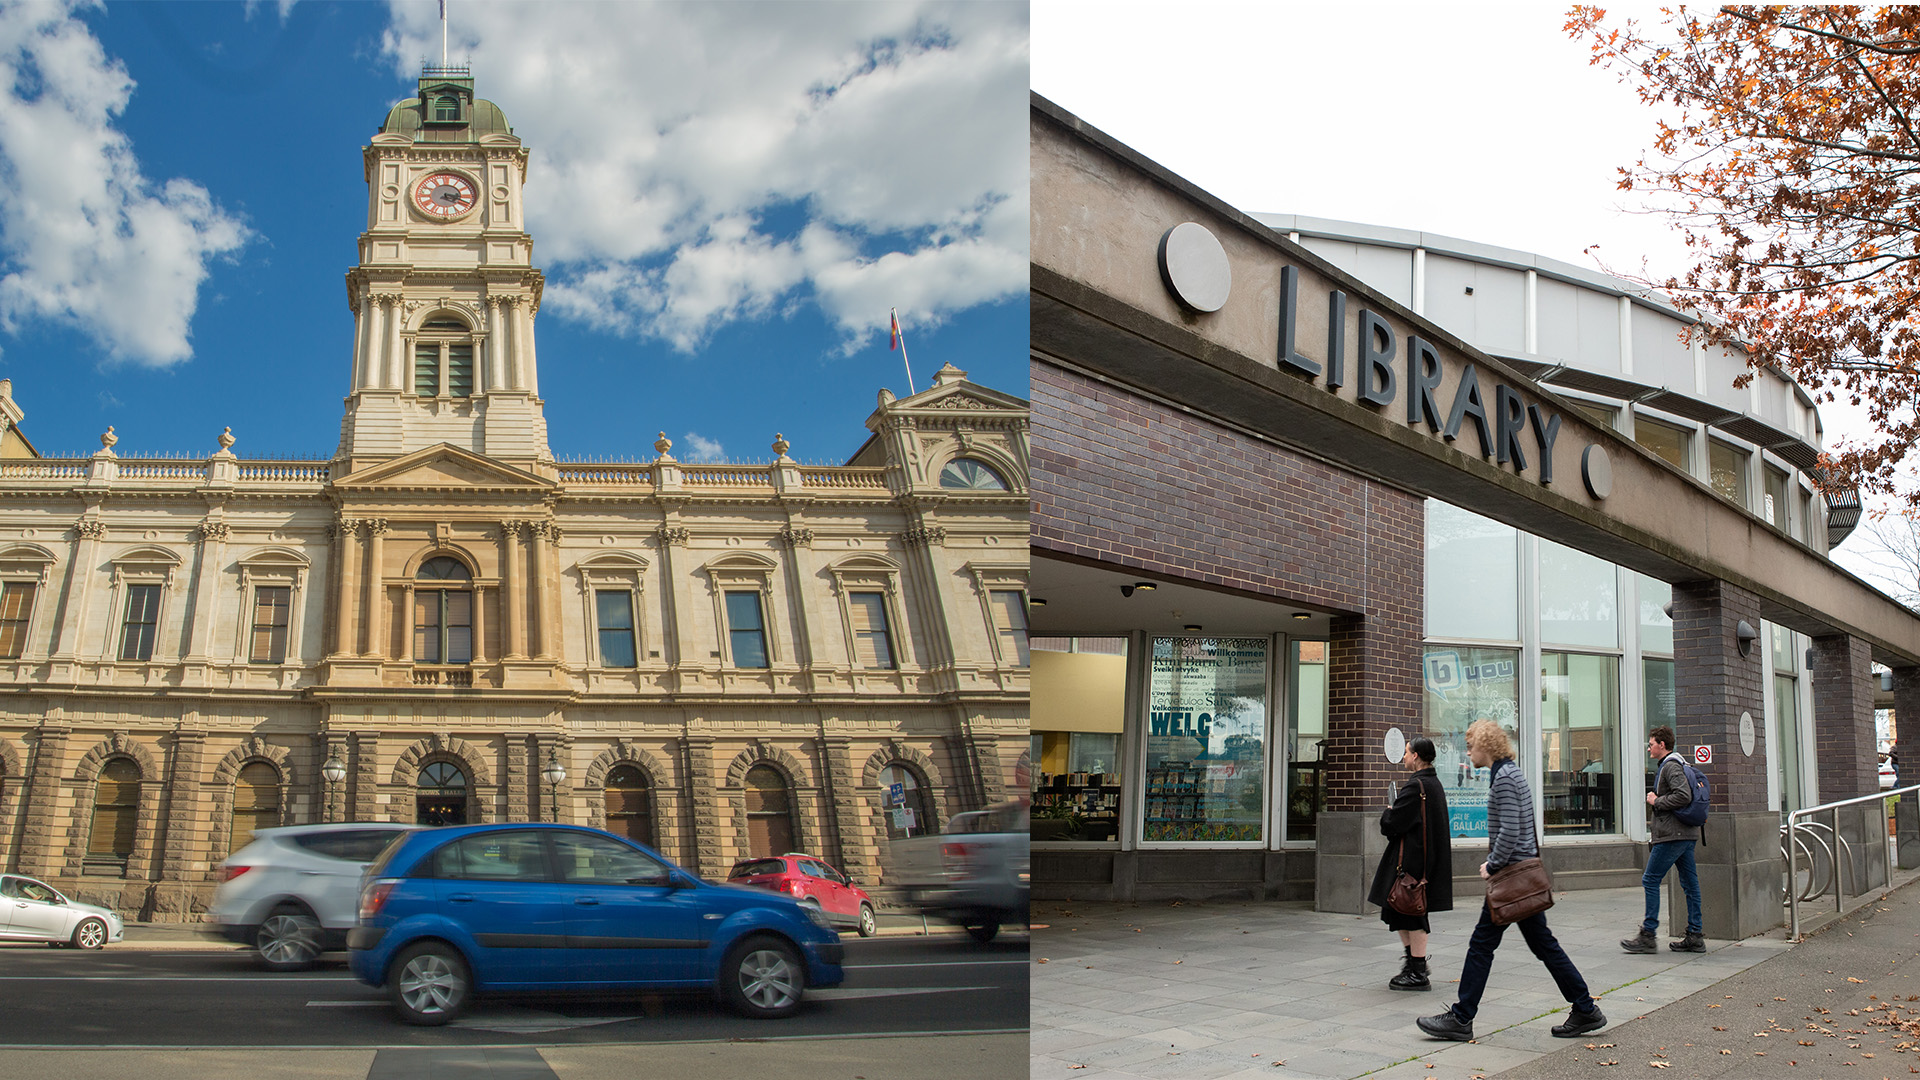 Ballarat Town Hall will be the new home for a pop-up library